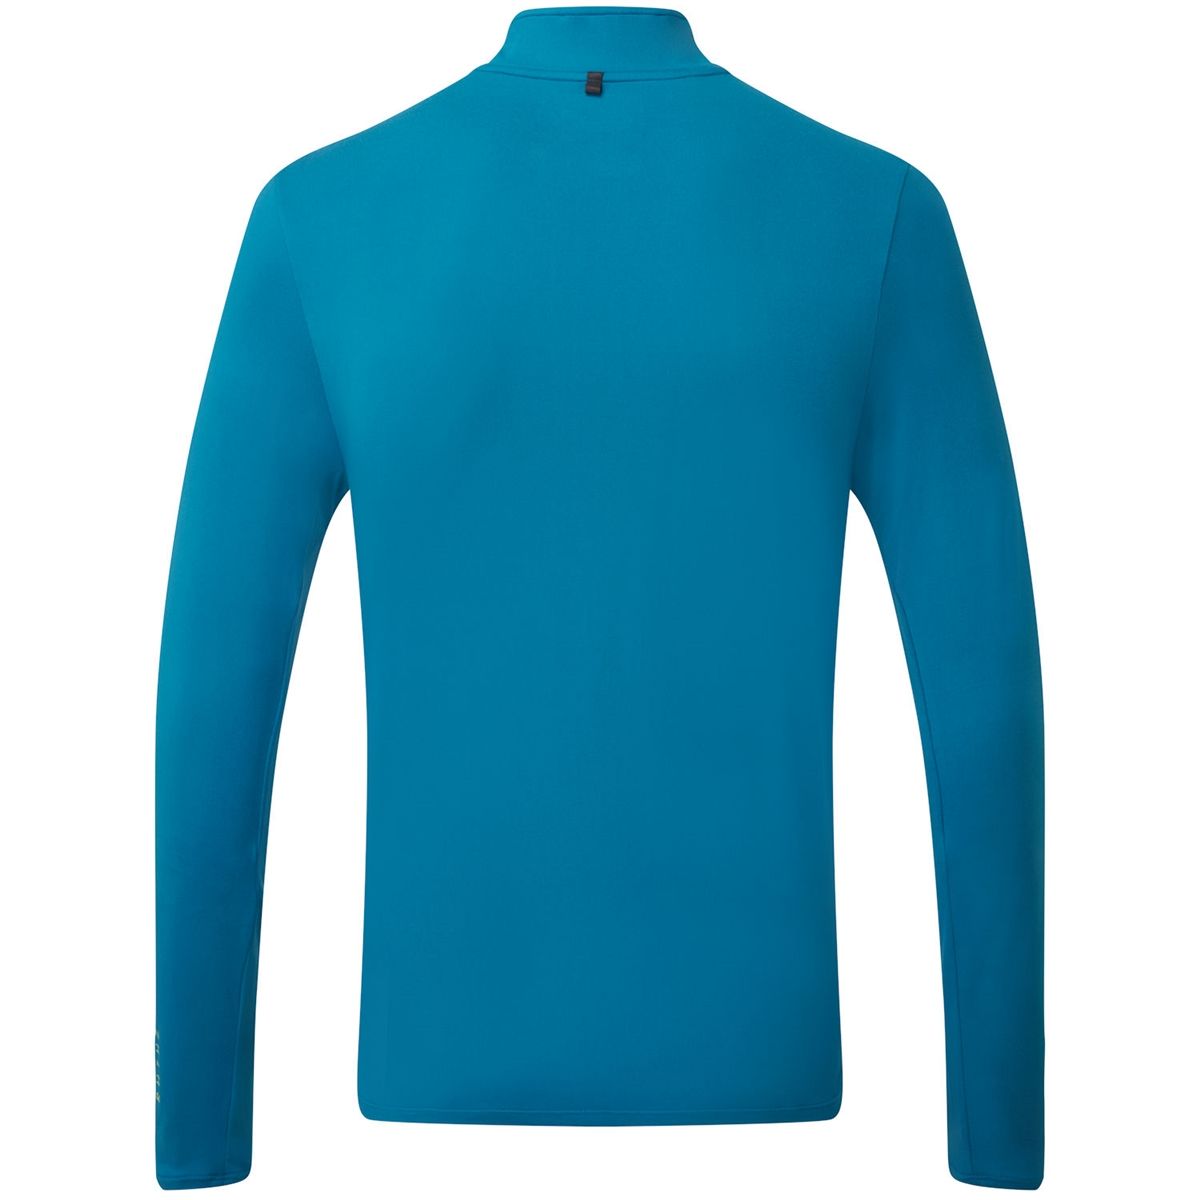 ron-hill-mens-tech-thermal-12-zip-tee-prussian-bluewillow